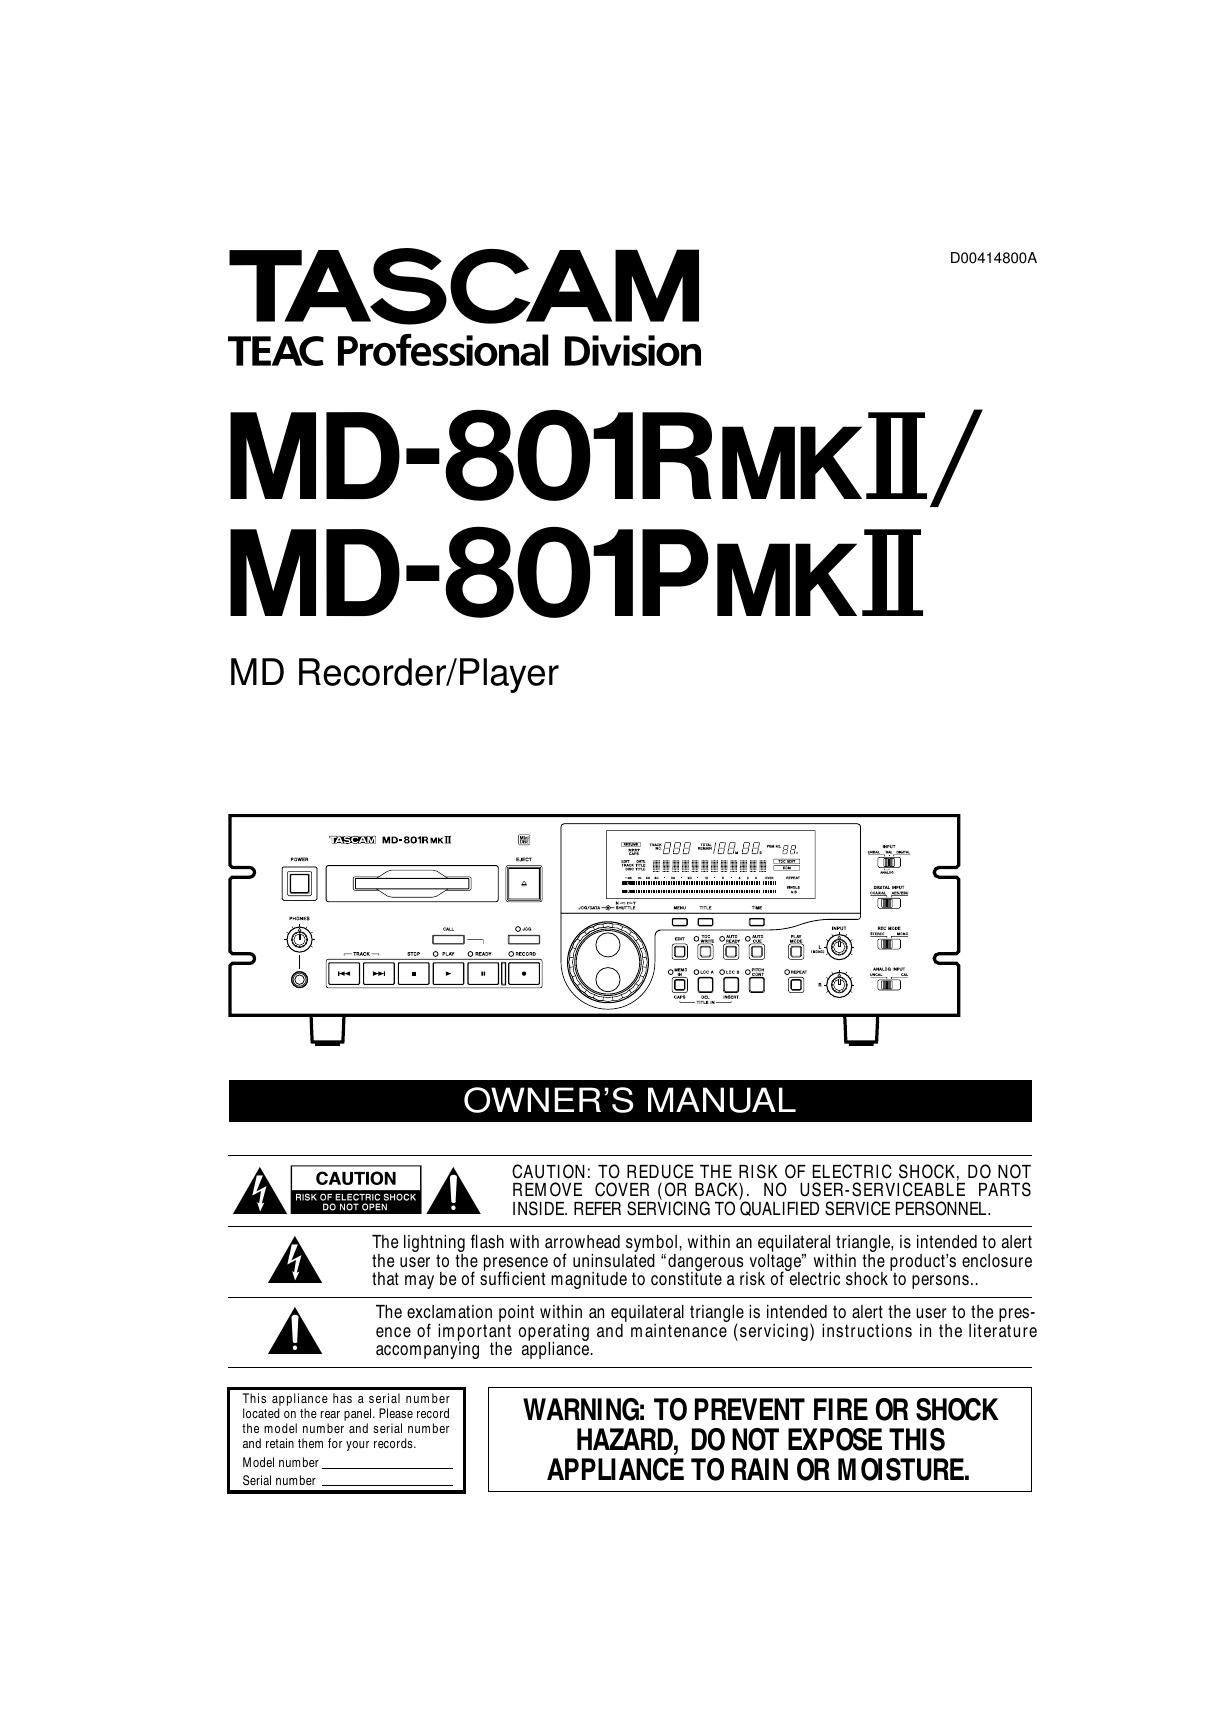 tascam md 801 p mk2 owners manual